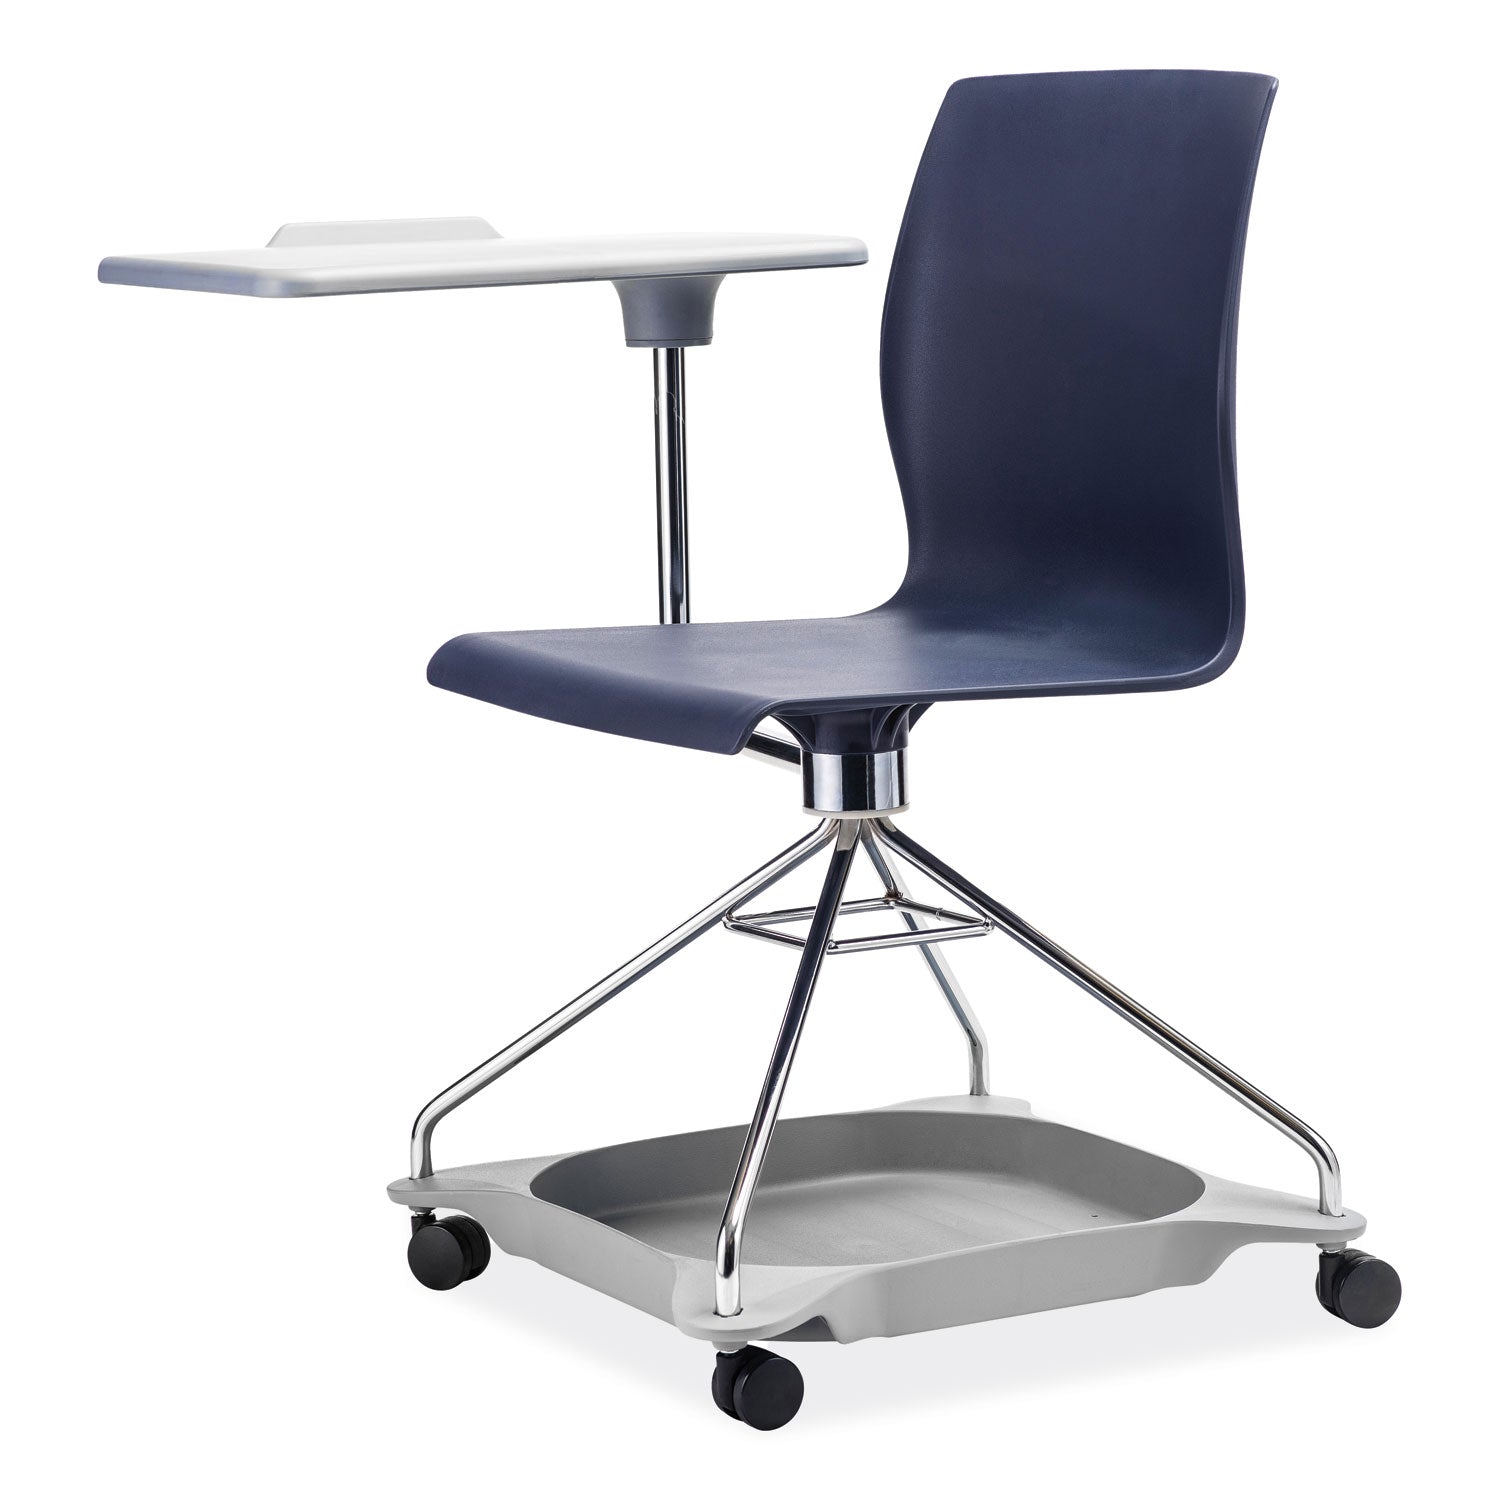 cogo-mobile-tablet-chair-supports-up-to-440-lb-1875-seat-height-blue-seat-back-chrome-frame-ships-in-1-3-business-days_npscogo04 - 4